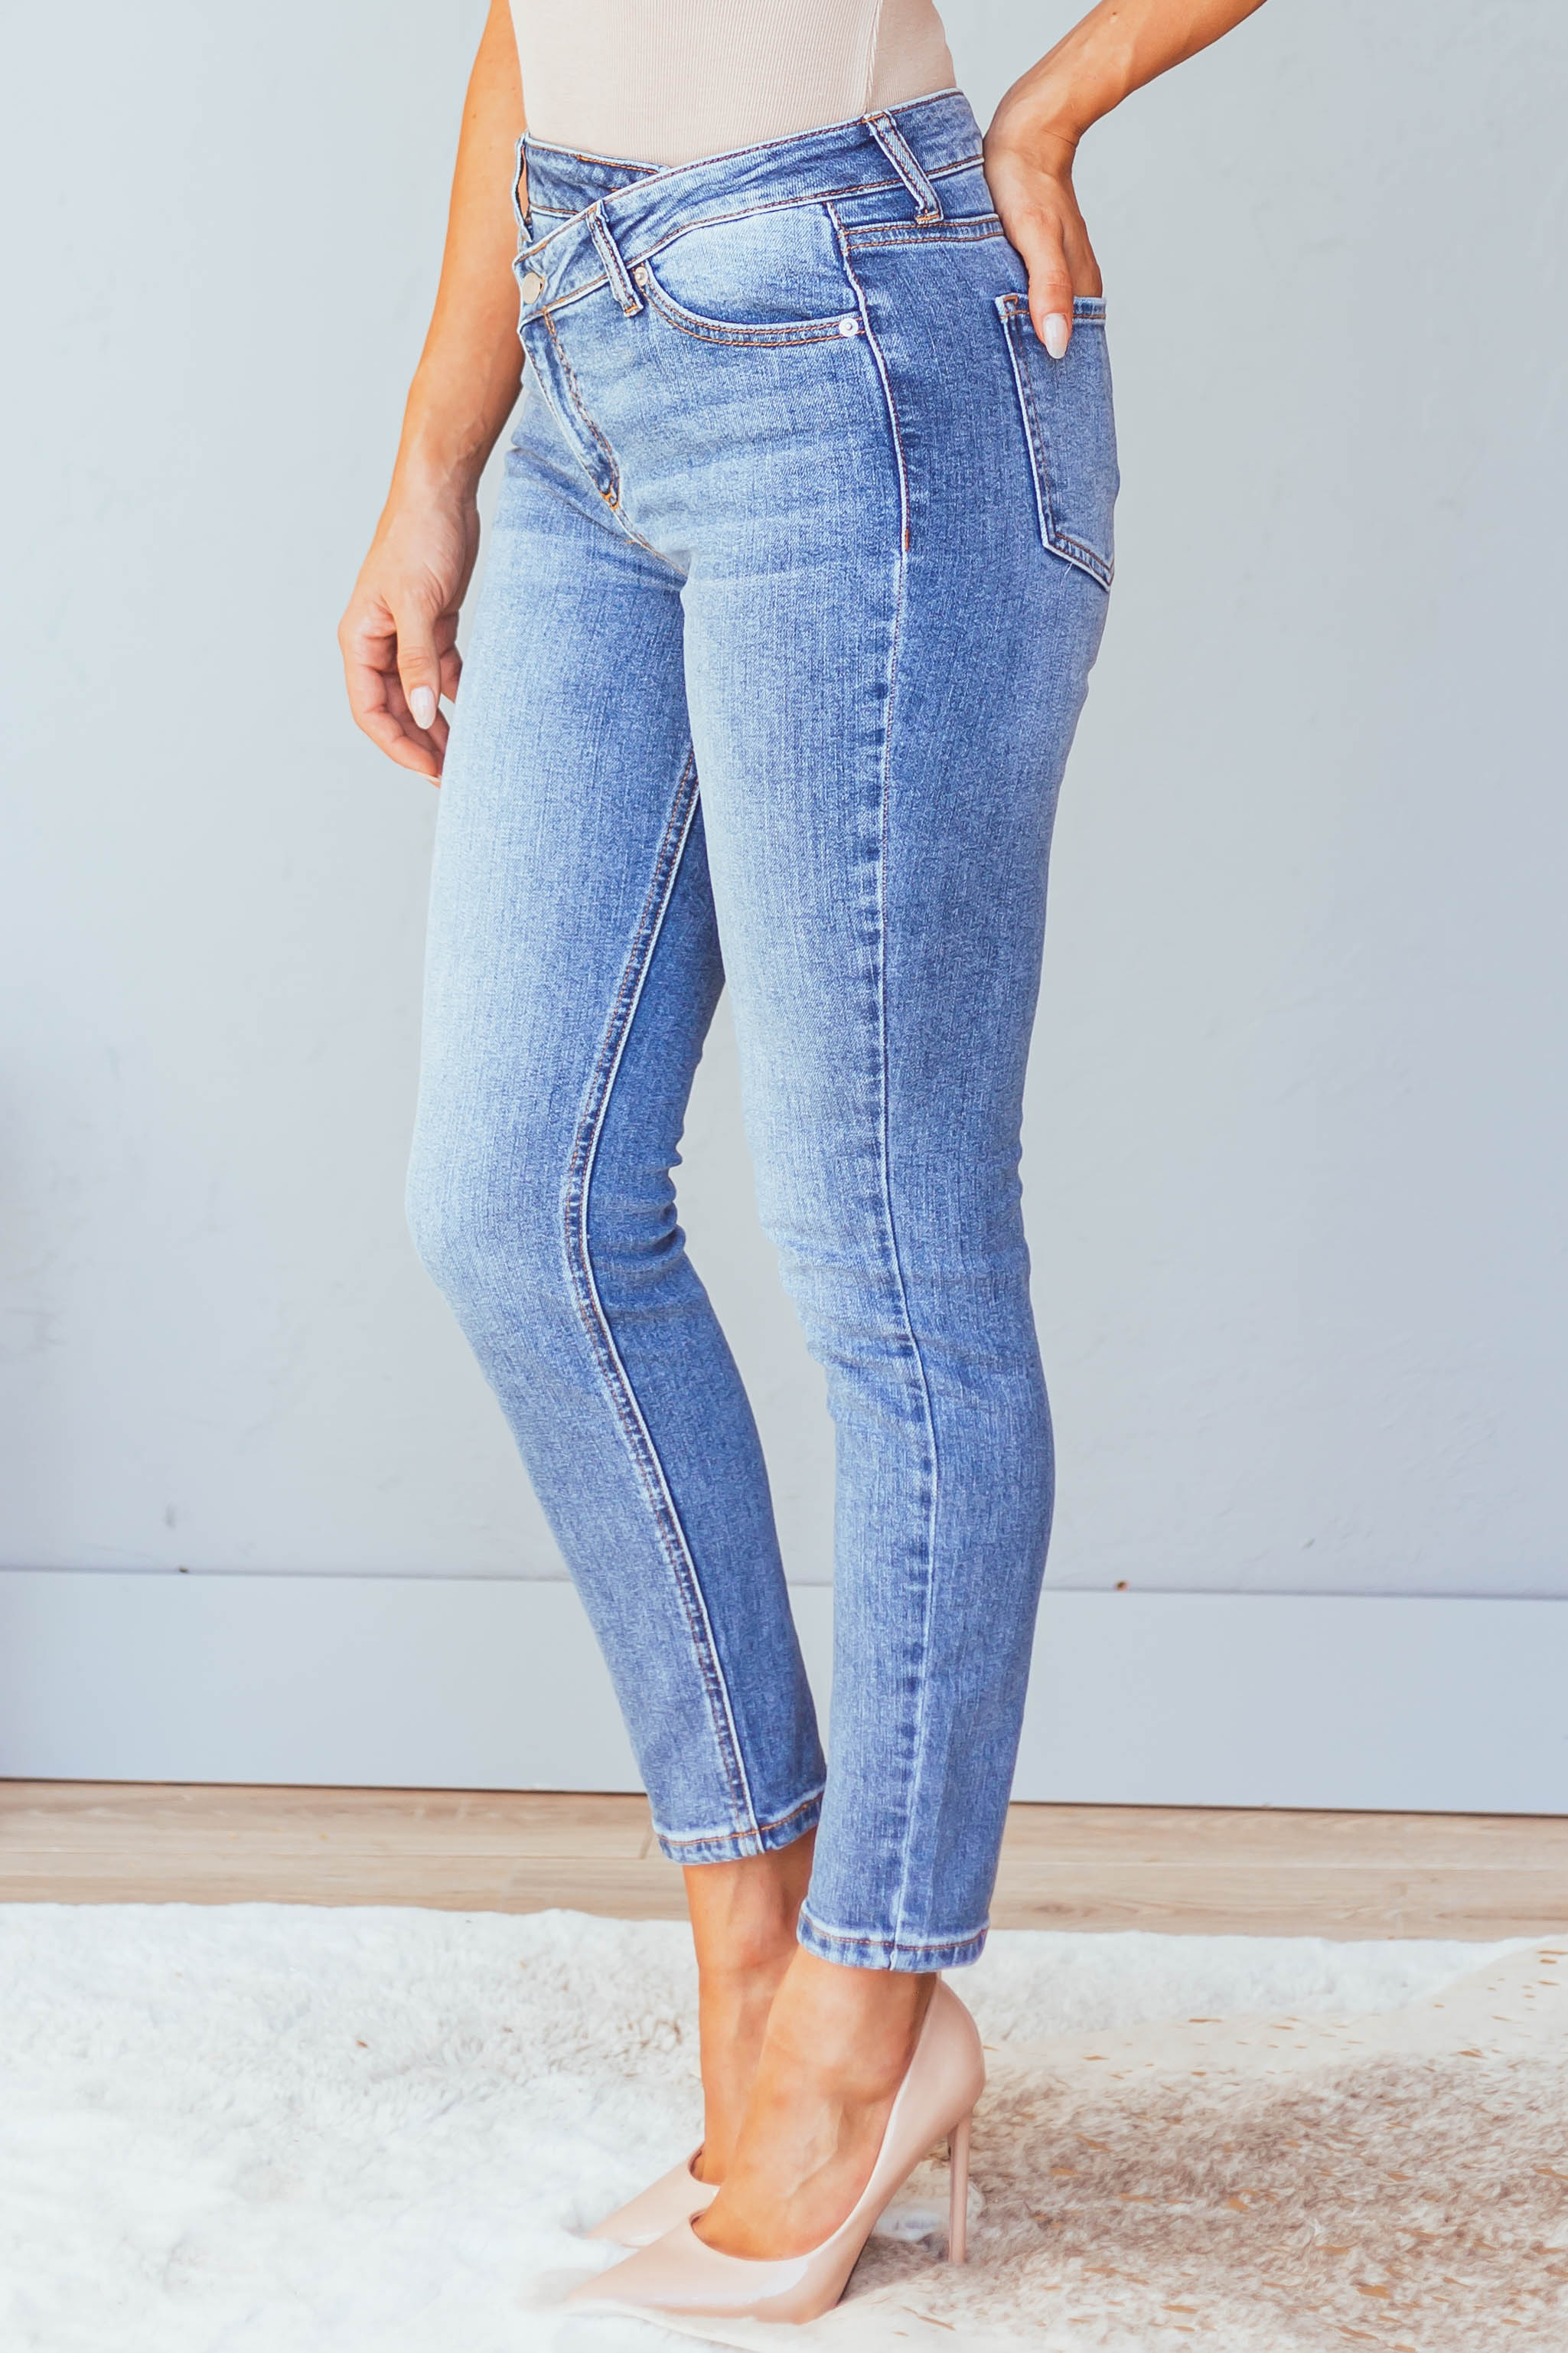 Sneak Peek Medium Wash High Rise Skinny Jeans with Crossover Fly